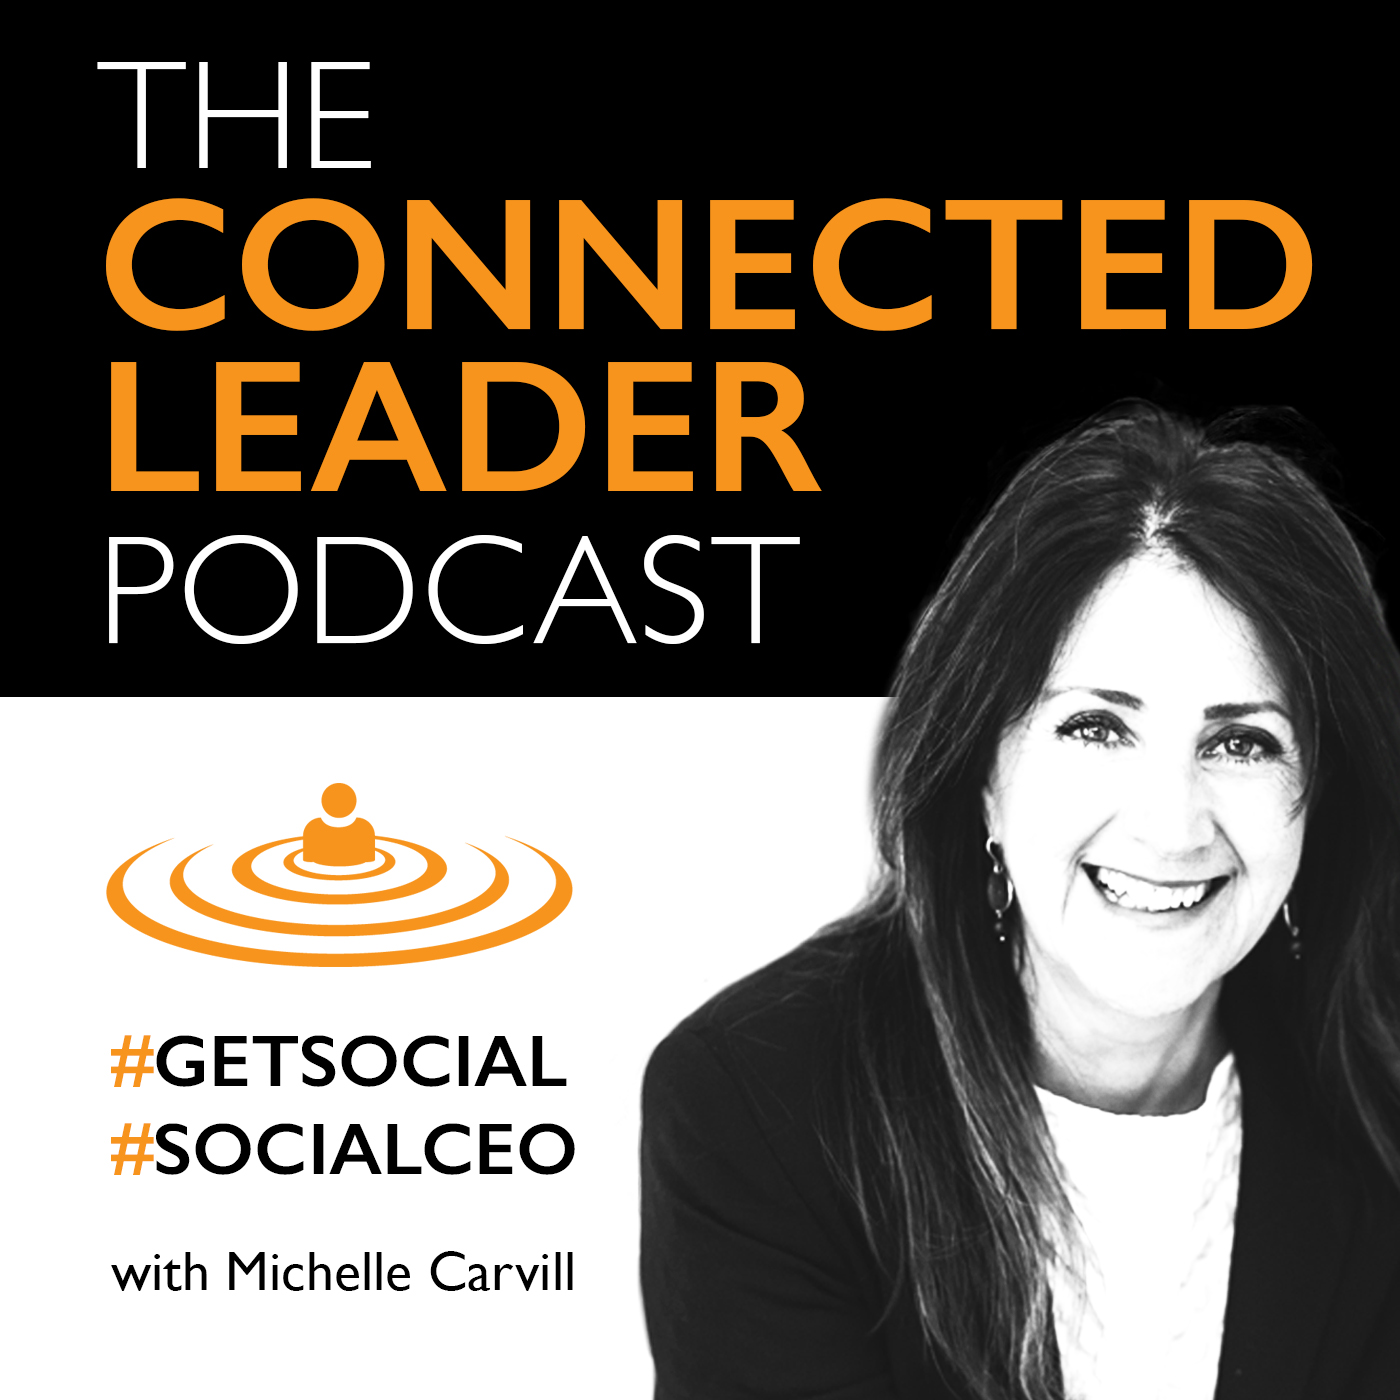 #GetSocial - The Connected Leader Podcast